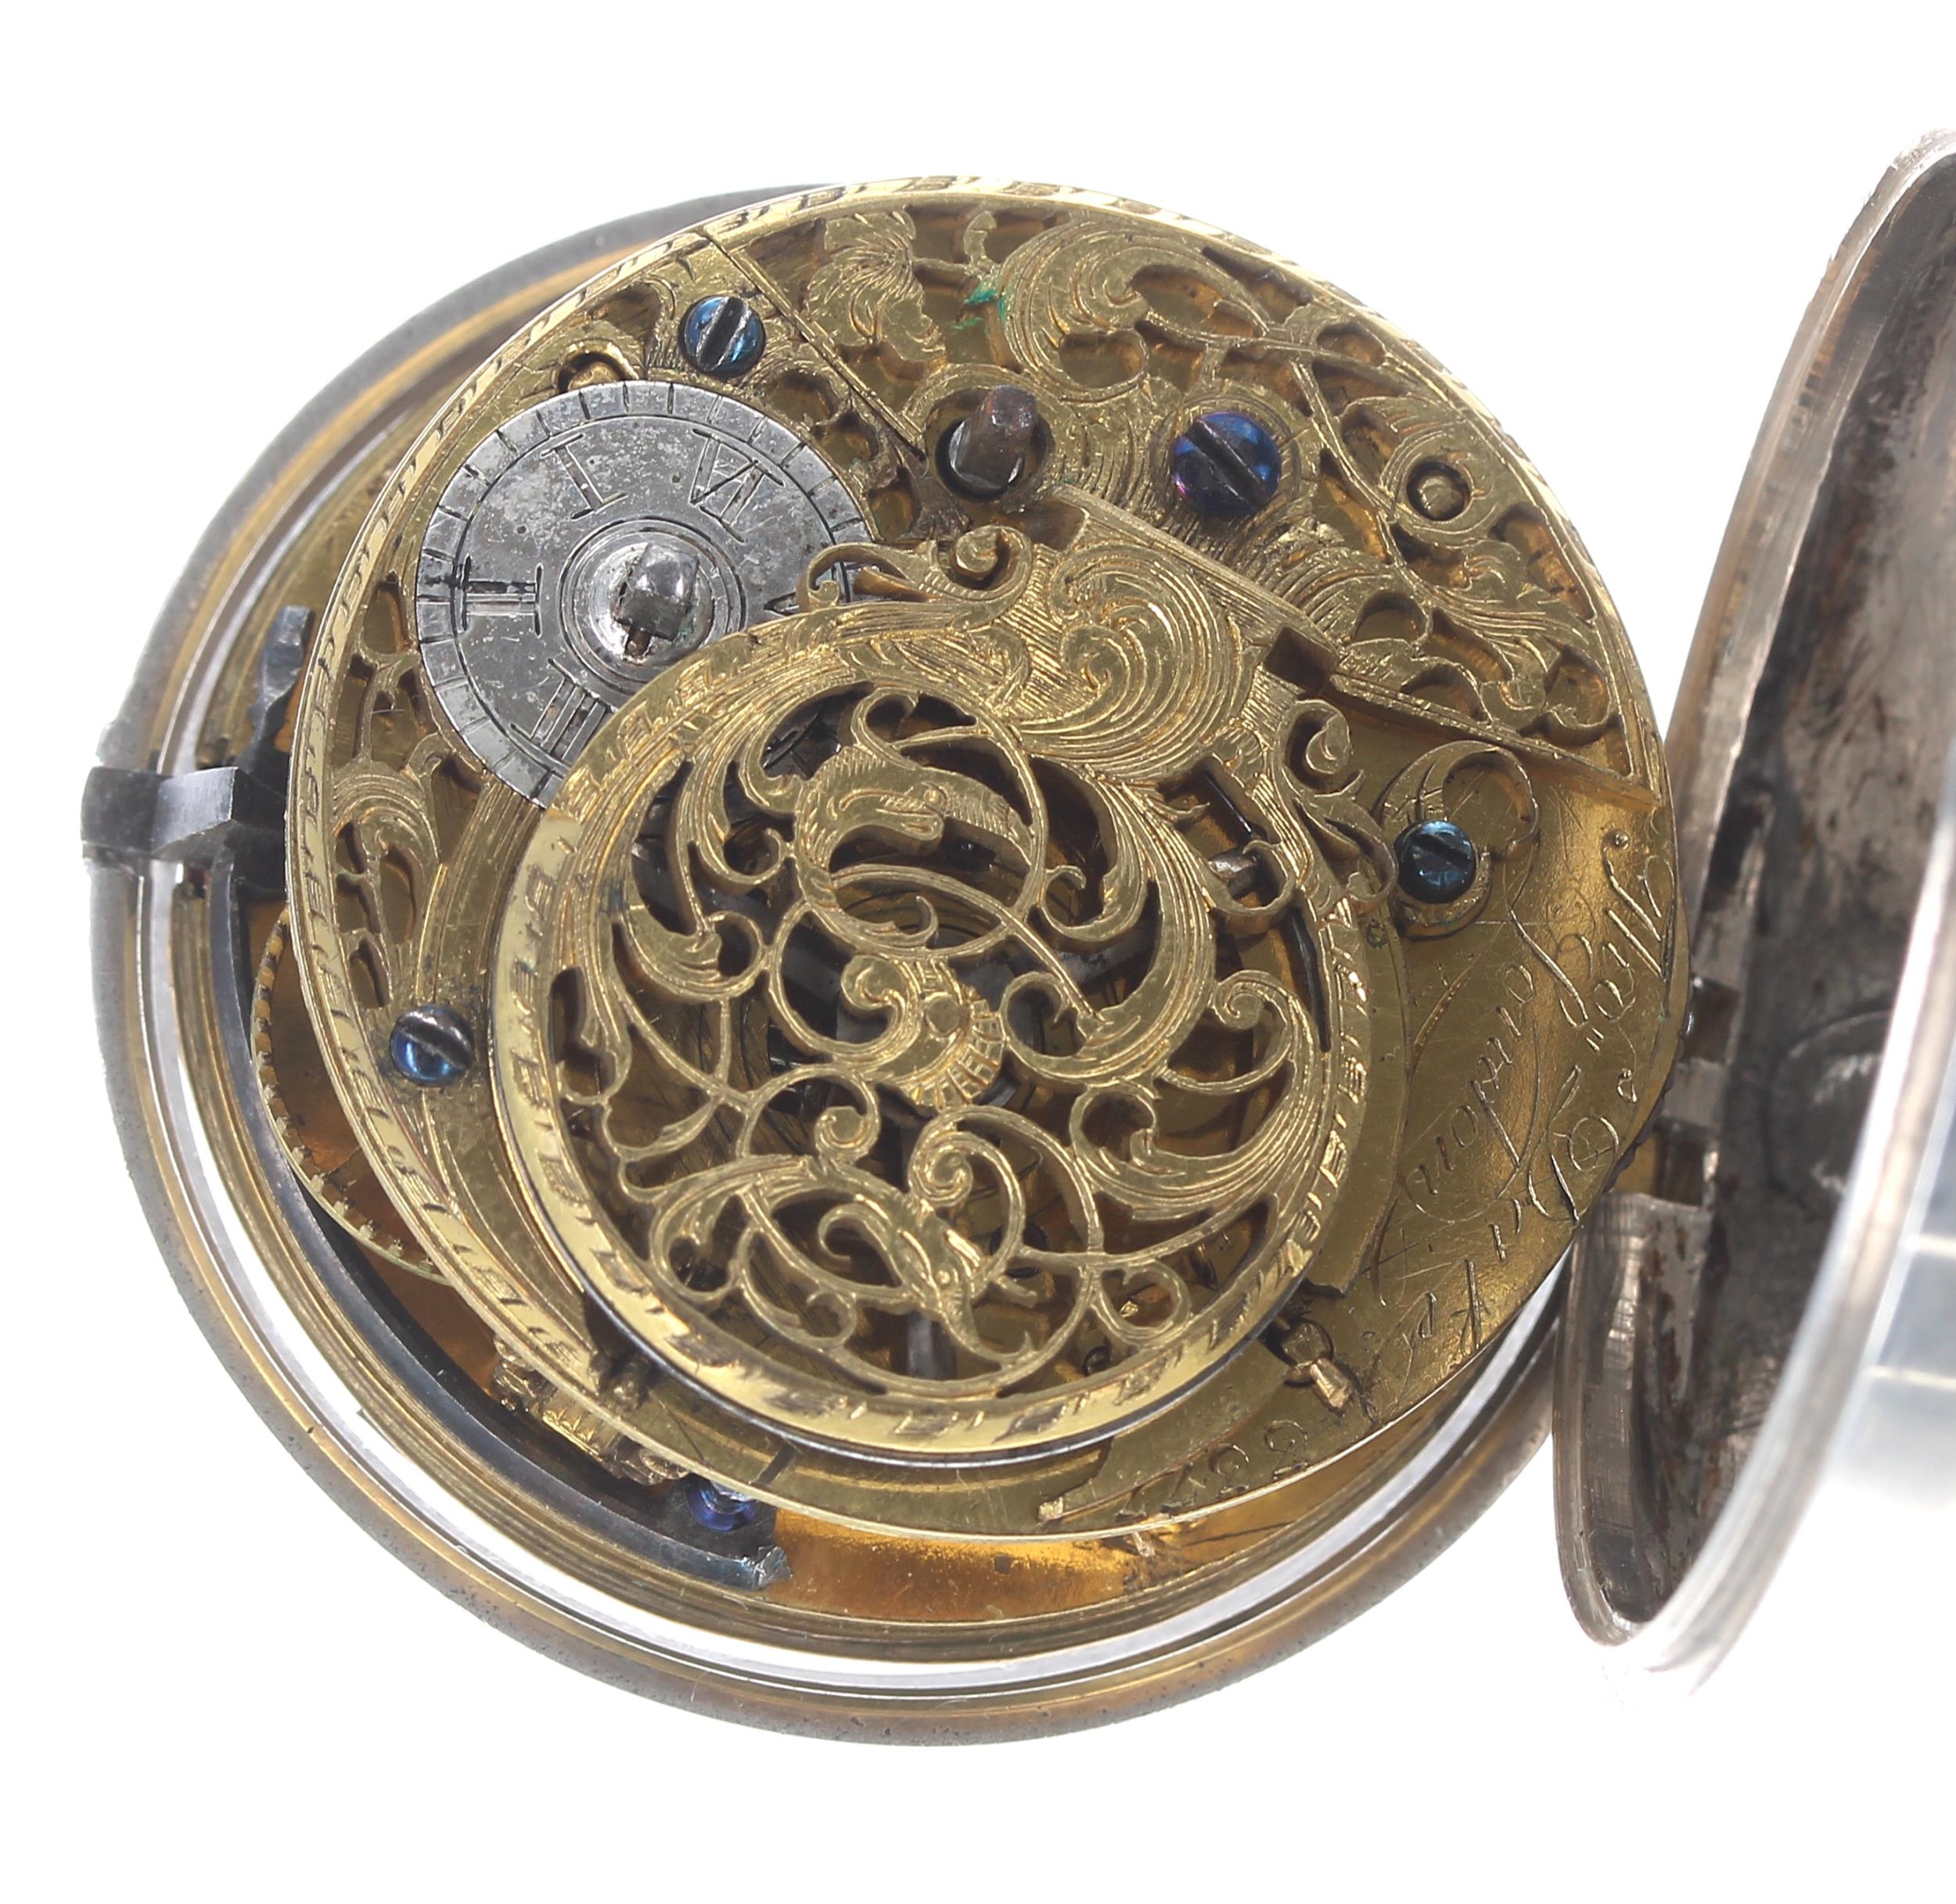 George III English silver pair cased verge pocket watch, London 1765, the fusee movement signed Thos - Image 5 of 6